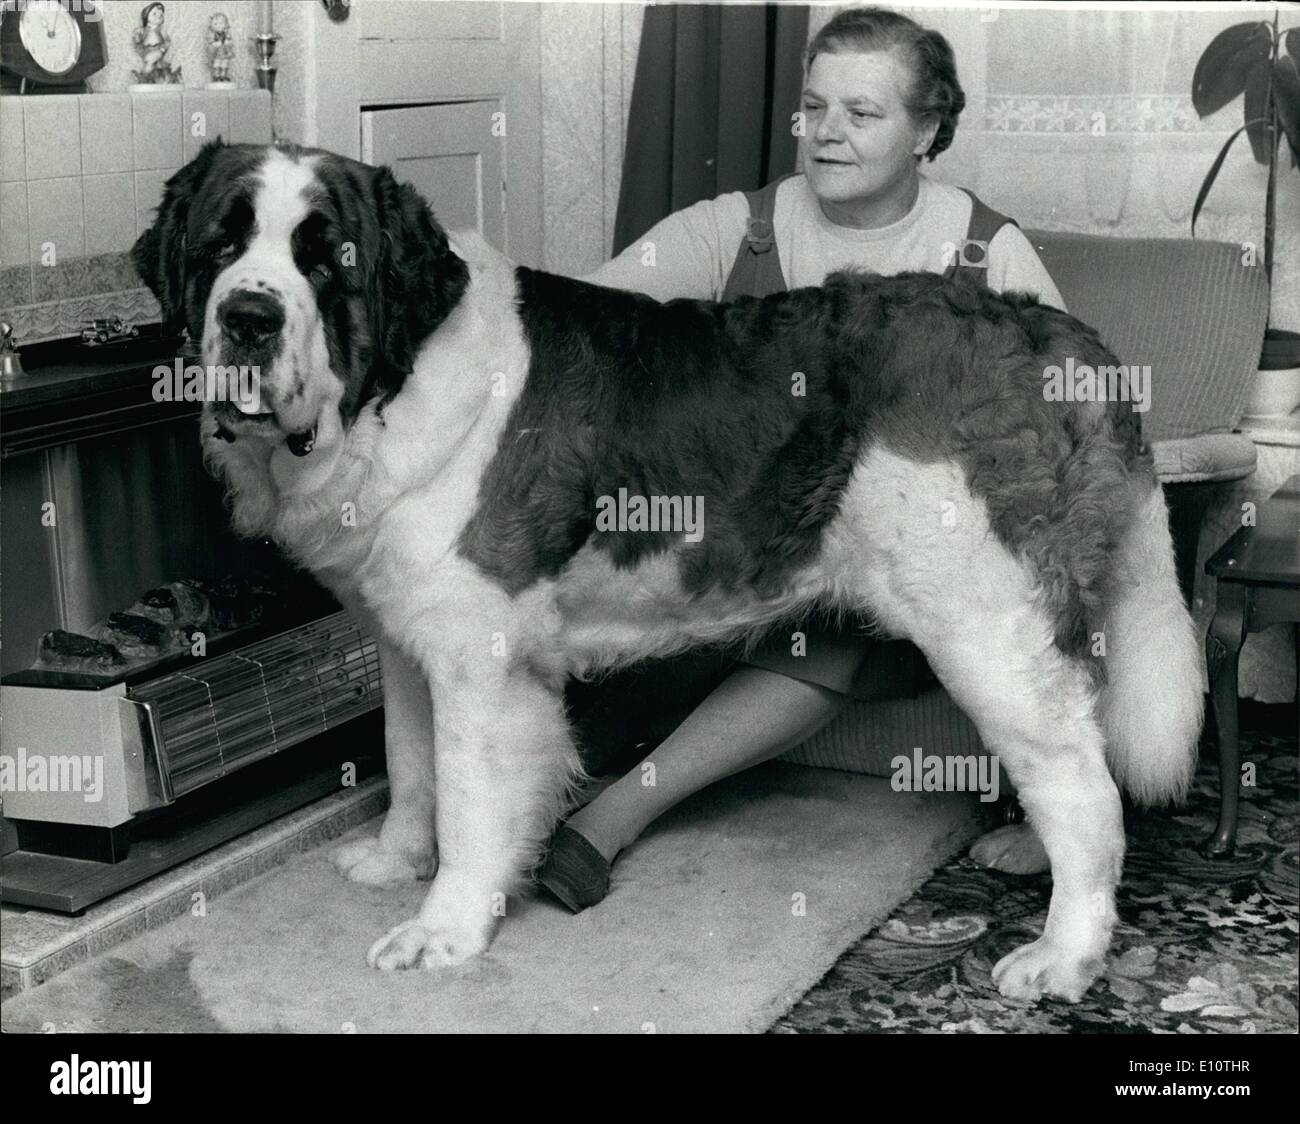 Feb. 02, 1974 - A St Bernard is Supreme Champion at Cruft's: A st Bernard dog was chosen supreme champion at Cruft's dog show, at Olympia on Saturday, for the first time in the Show's 78-year History. The winner, Burtons wood Bossy Boots, age 2.5, is owned by Miss Marjorie Hindes, of yardley Gobion, Northants, a retired nurse who breeds St. Bernards as a hobby. Miss Hindes said: ''I named him Bossy Boots because he was the top dog of the litter and was always bossing the other pups Stock Photo